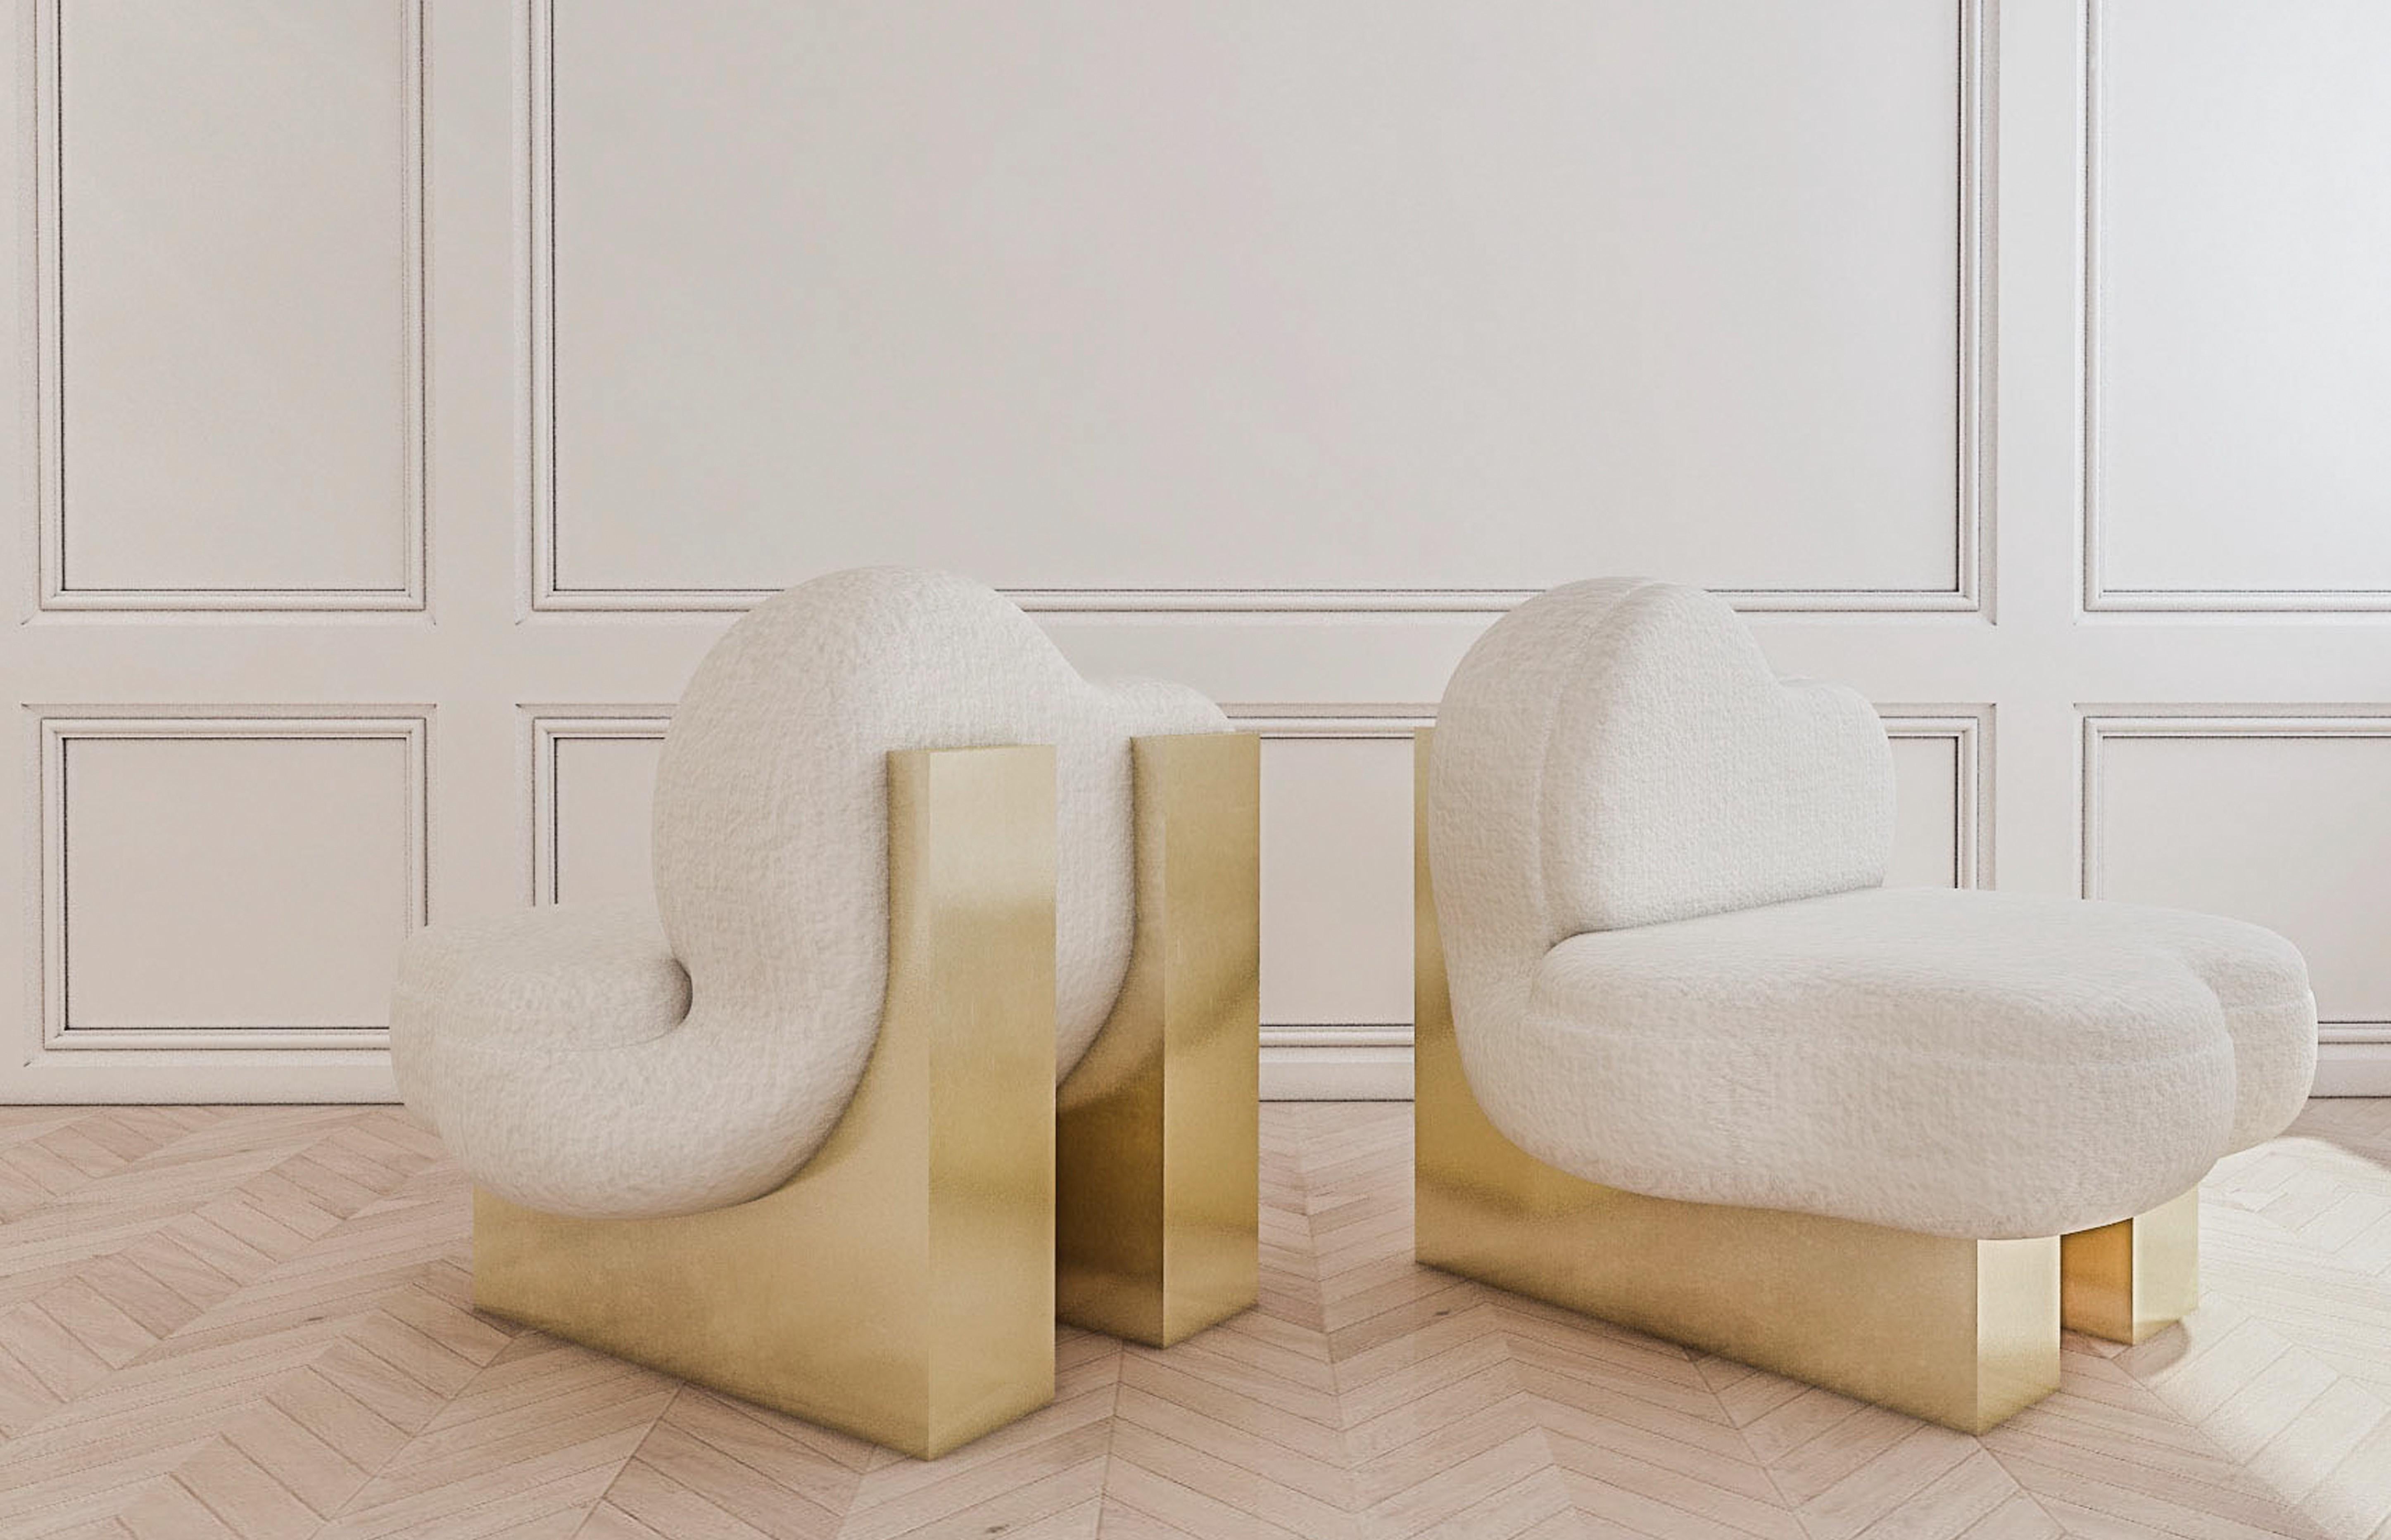 Set of 2 splash lounge chair by Melis Tatlicibasi
Materials: Velvet or boucle upsholery, natural wood, painted brass or silver
 Please contact us.
Dimensions: D 80 x W 70 x H 87 cm

I Melis Tatlicibasi form Turkey, am an Interior Designer. She